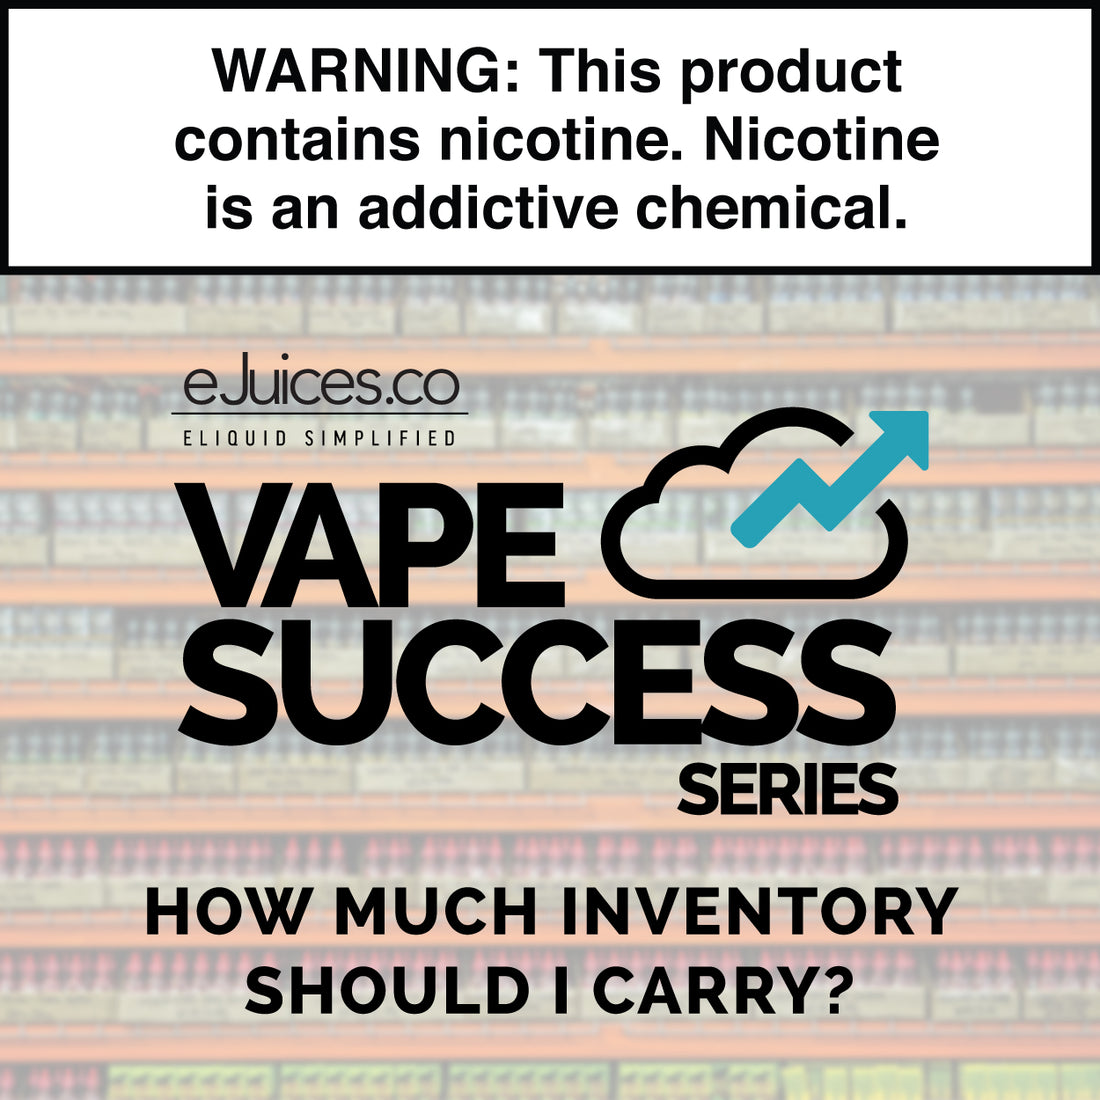 Vape Success Series: How Much Inventory Should I Carry?